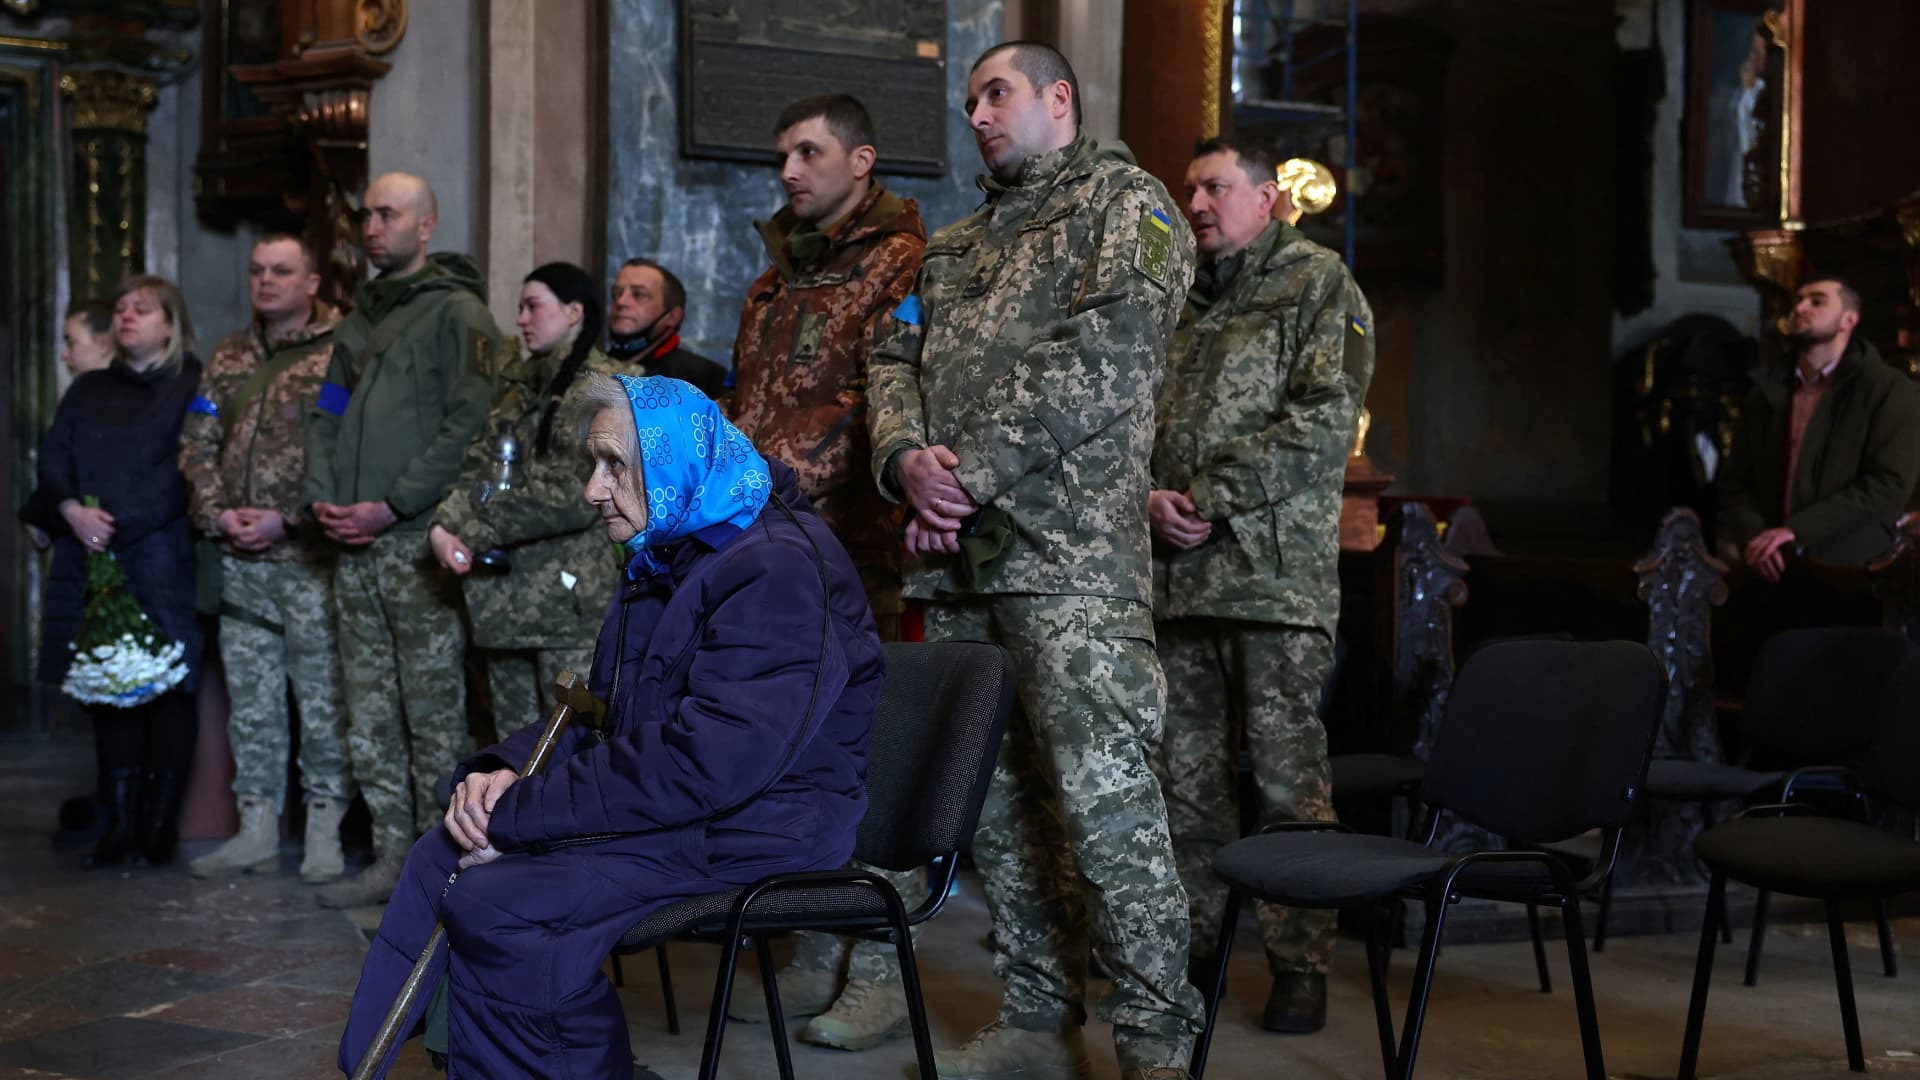 Family members and comrades of Ivan Skrypnyk, who was killed in a rocket attack against a military base in Yavoriv during the ongoing Russian invasion, pays their last respect during his memorial service in Lviv, Ukraine, March 17, 2022.